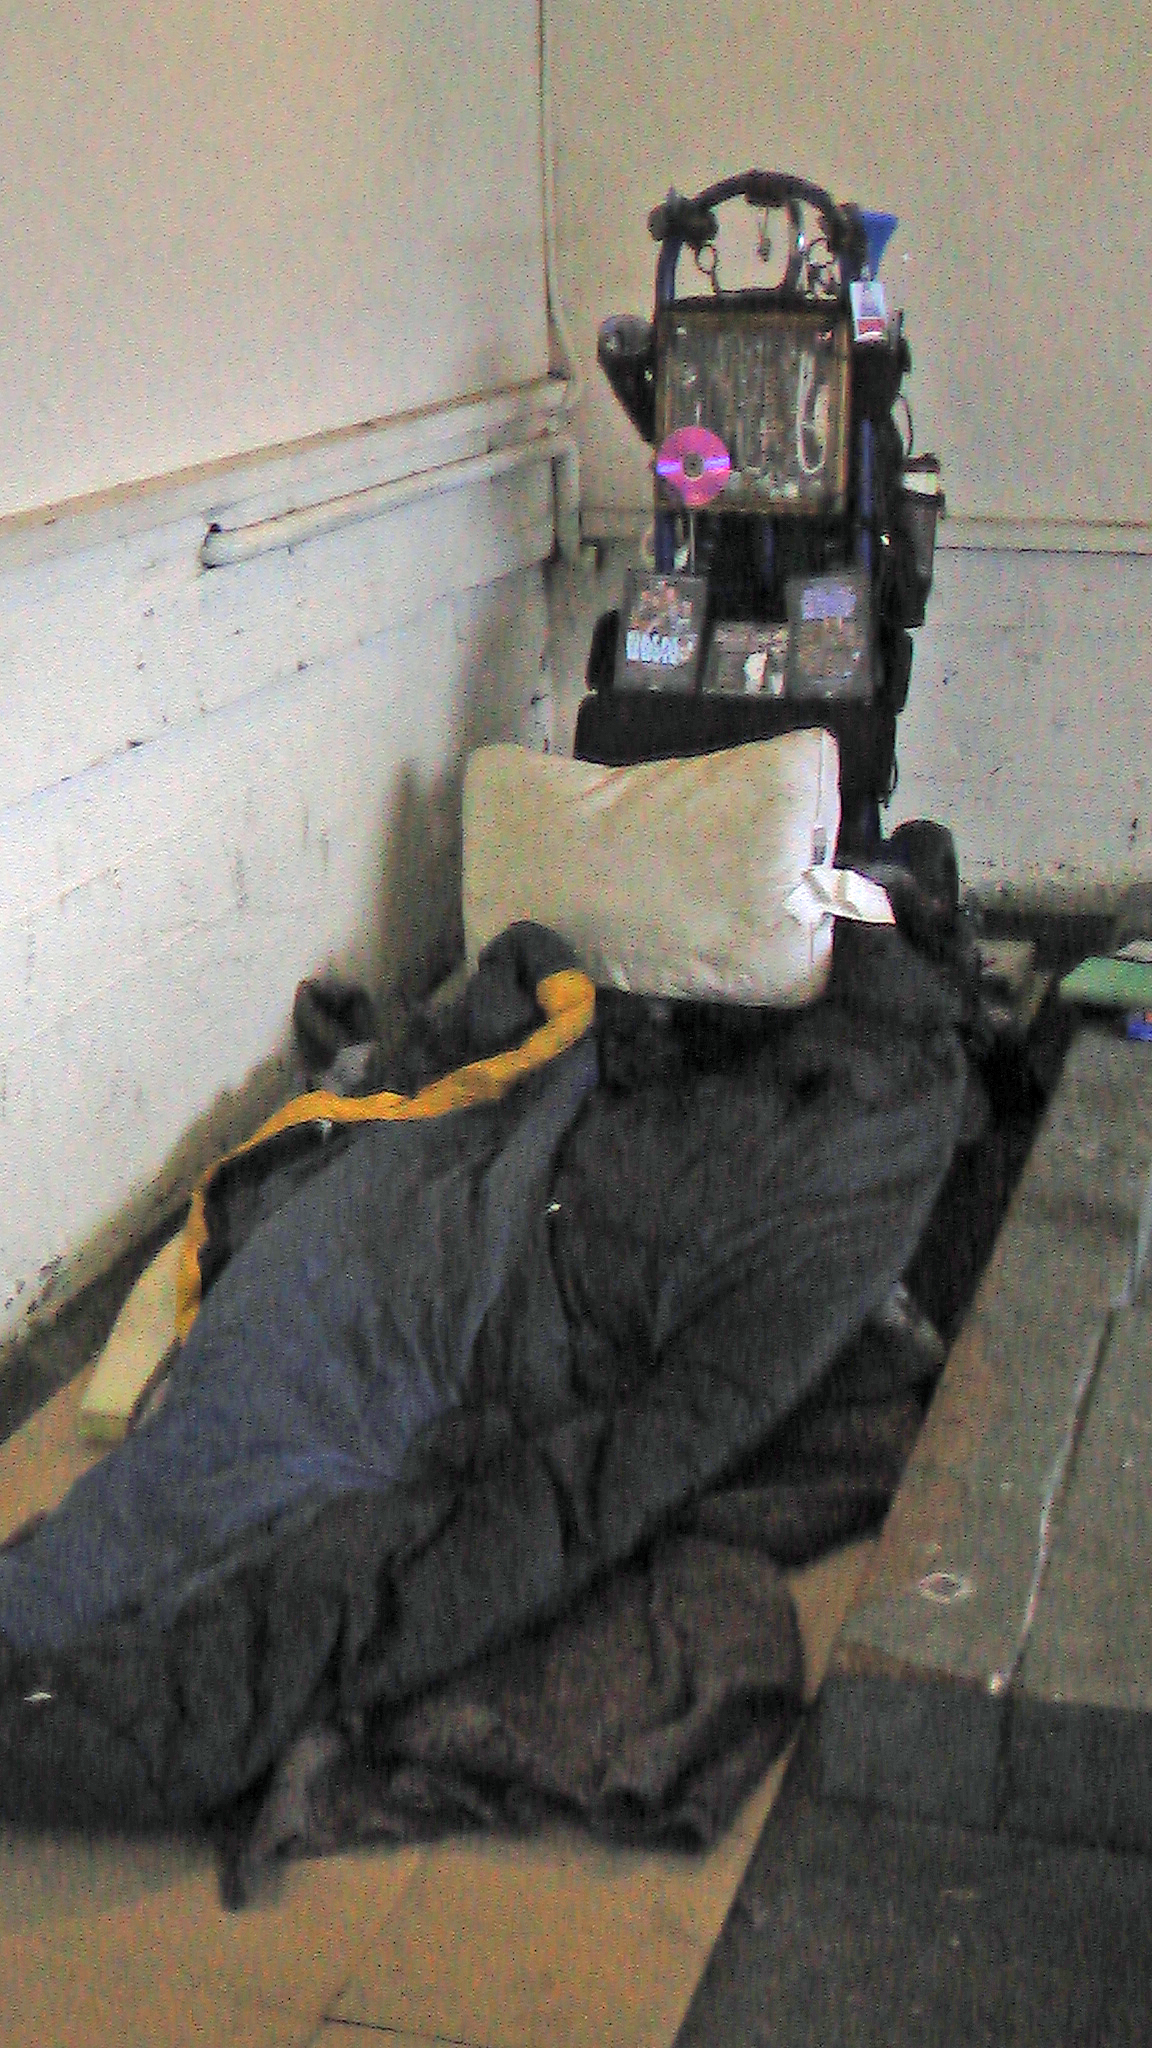 Urban Survival 101: How to Sleep in a Garage